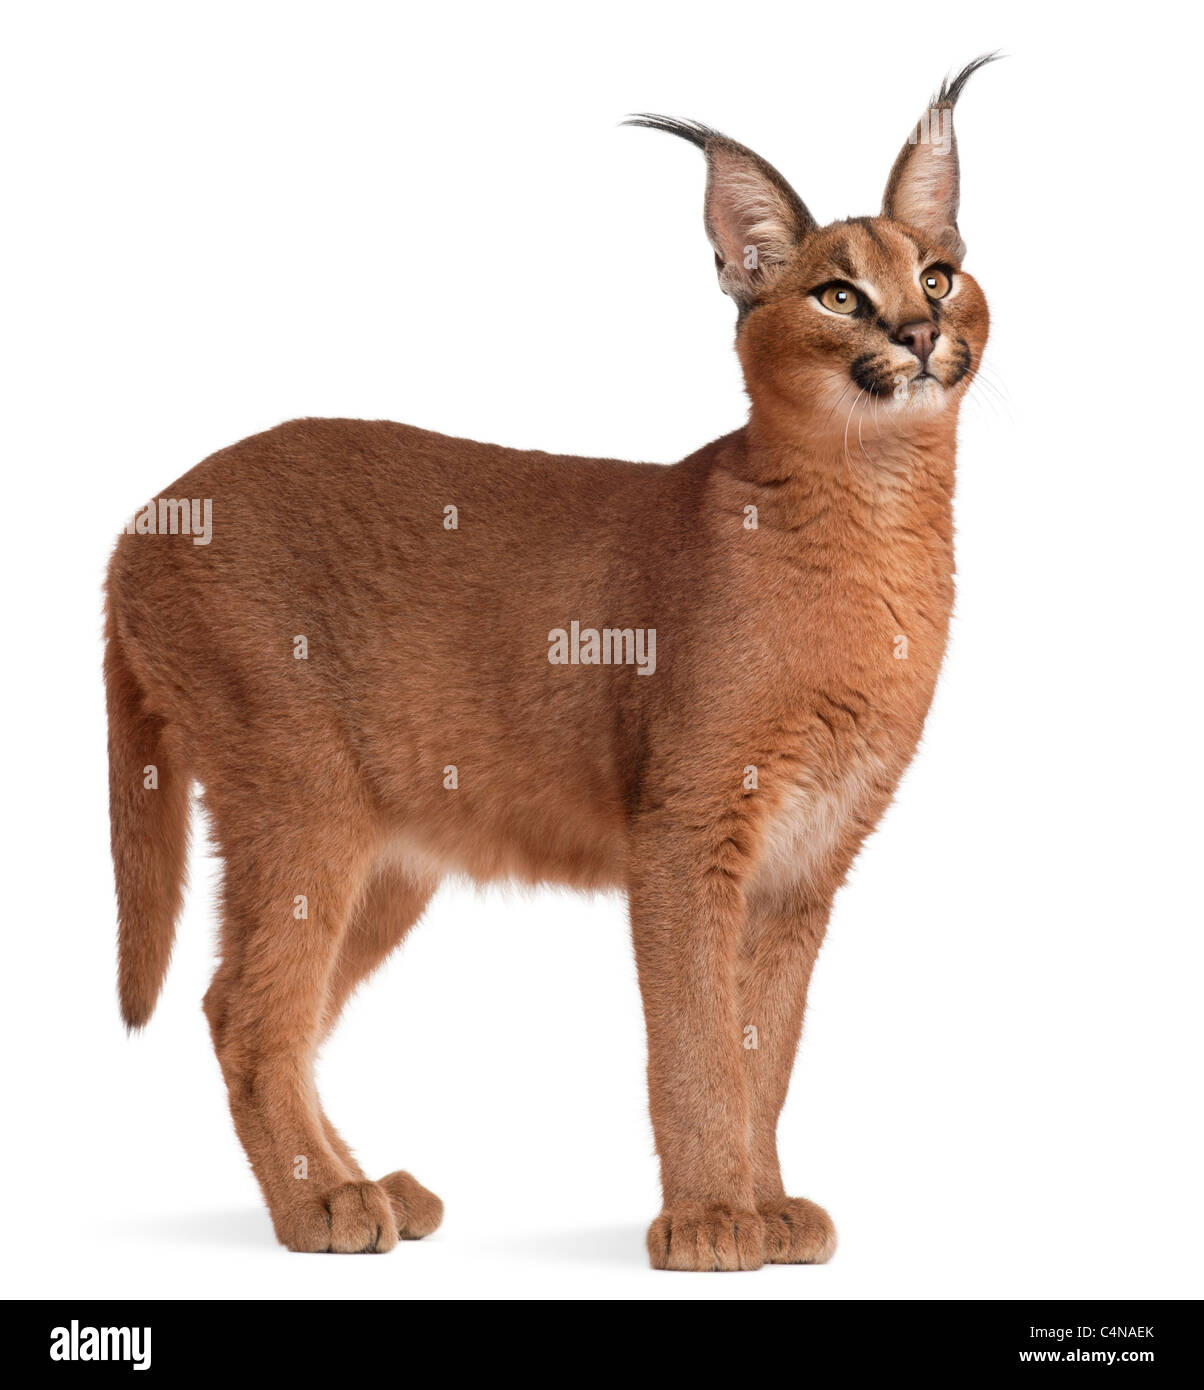 Caracal, Caracal caracal, 10 years old, in front of white background Banque D'Images